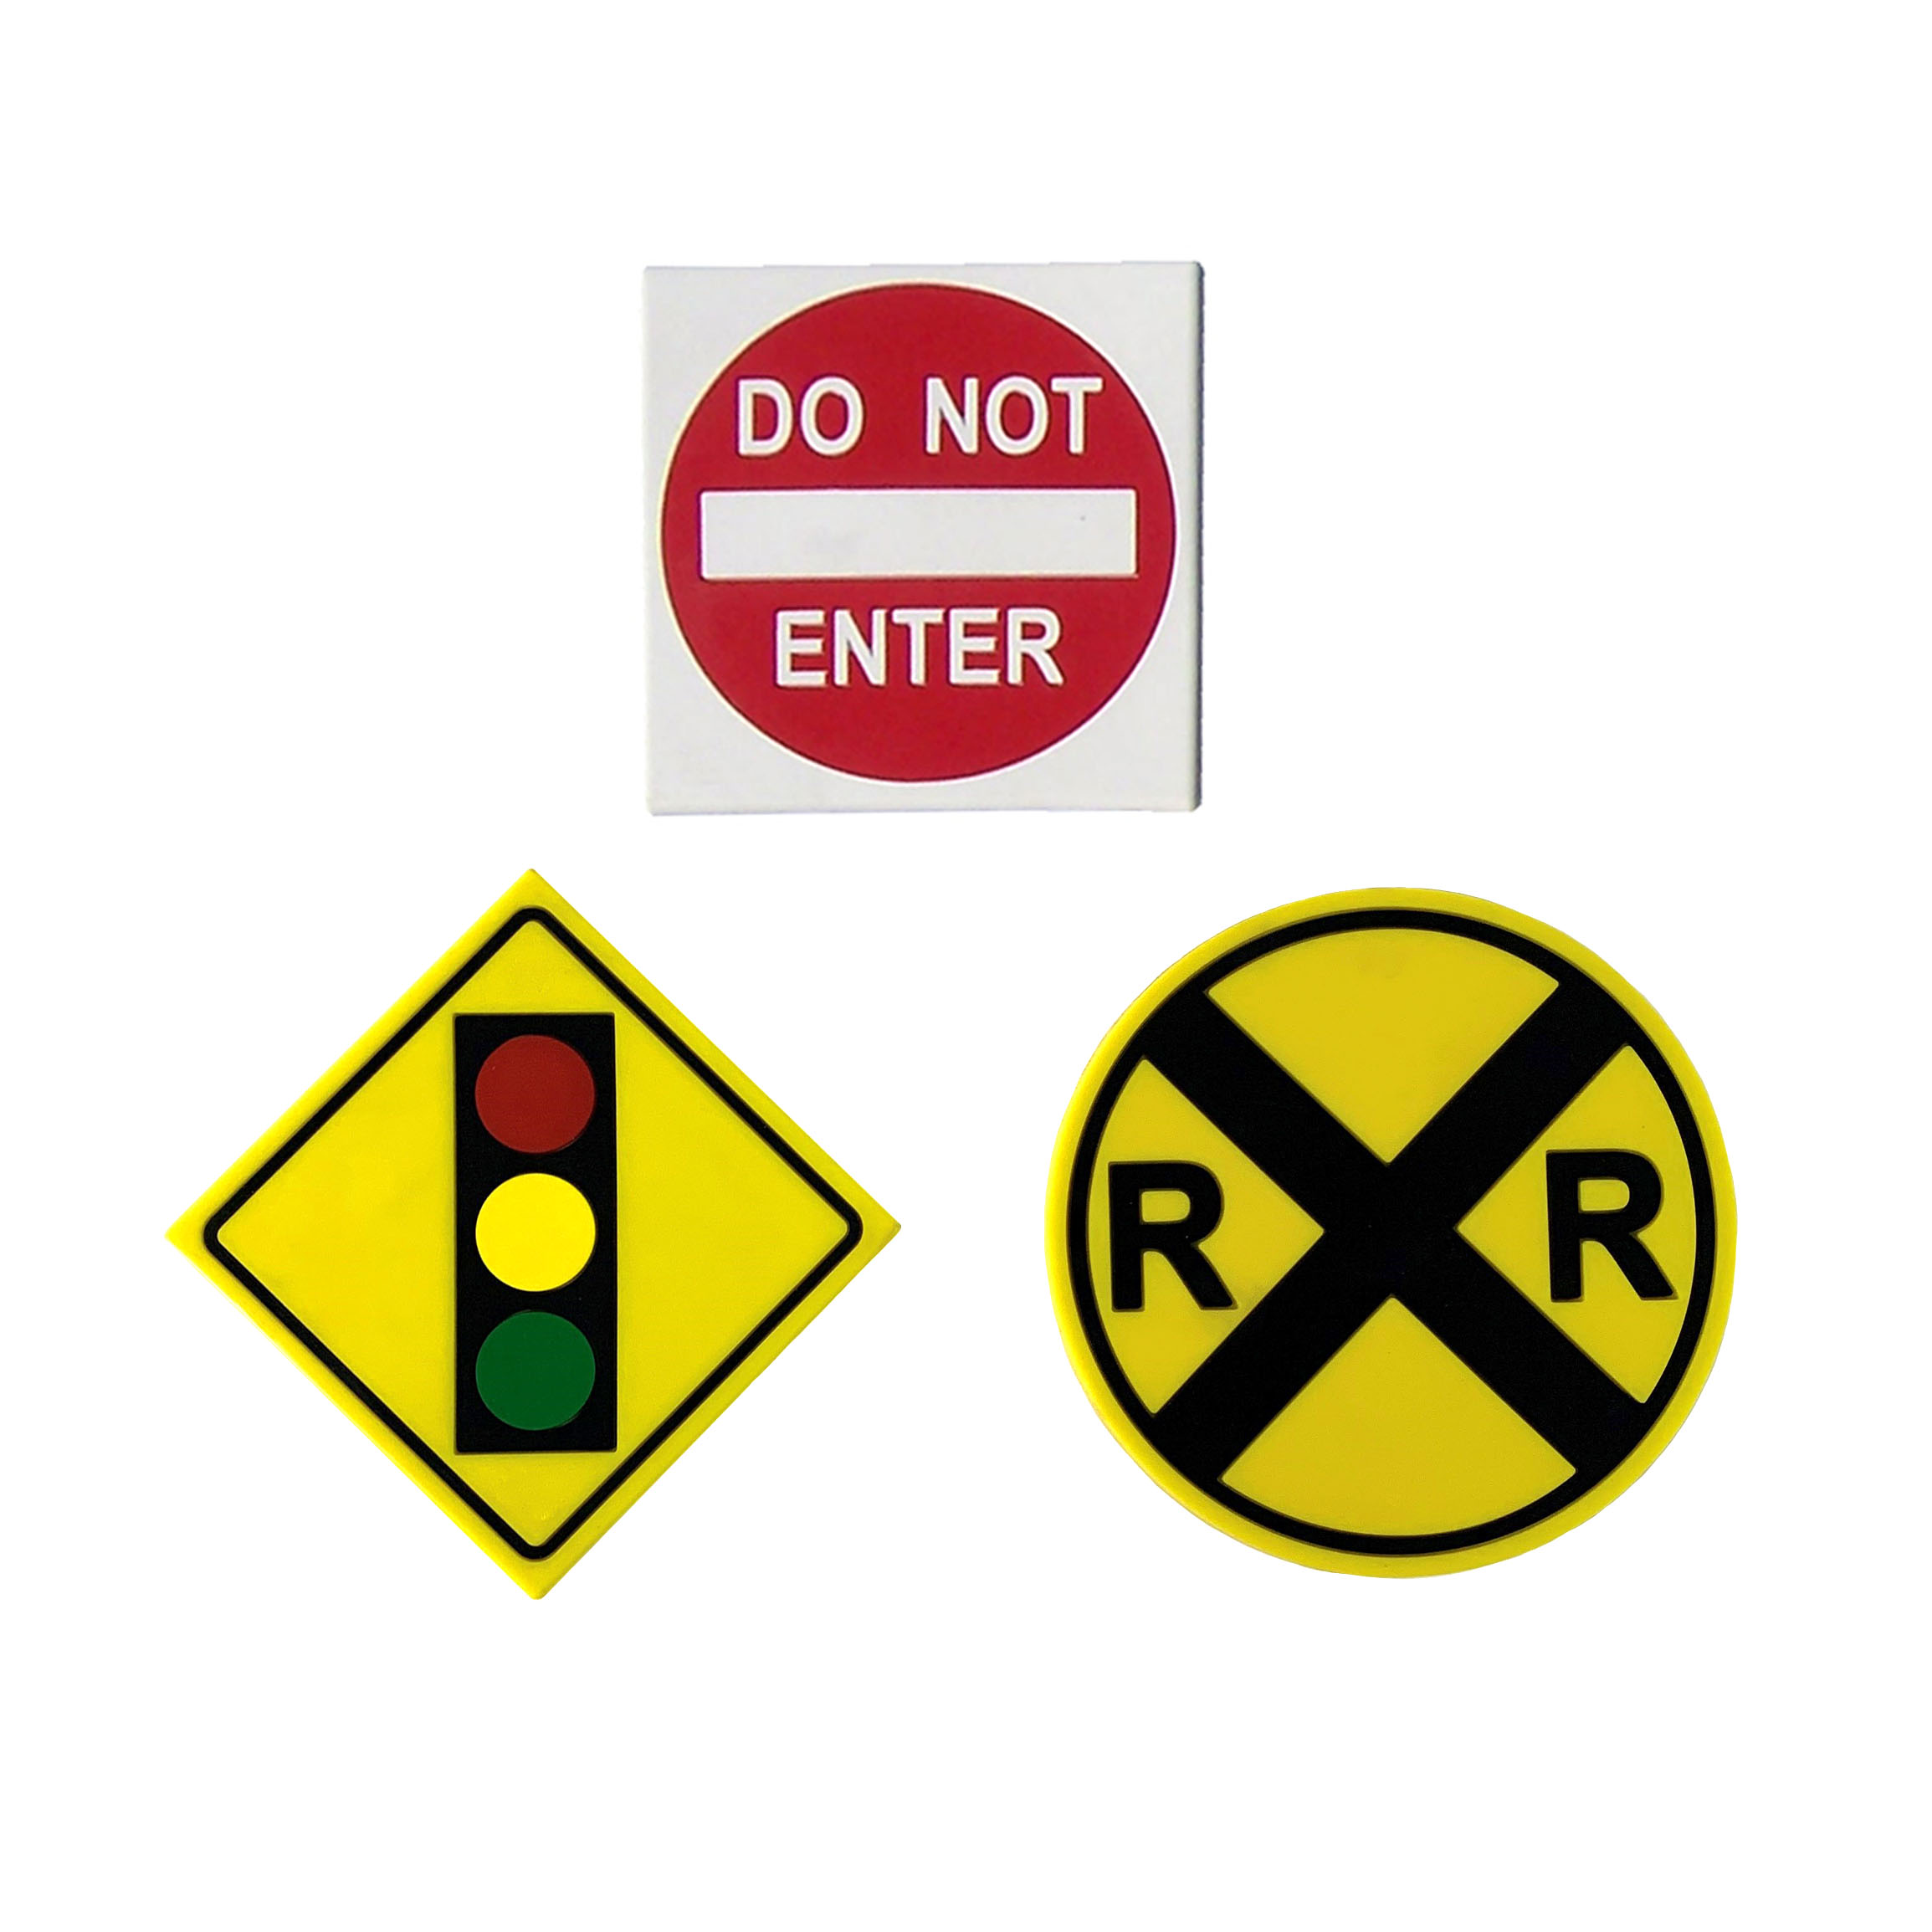 Poly Traffic Signs (Railroad, Do Not Enter, Traffic Light)